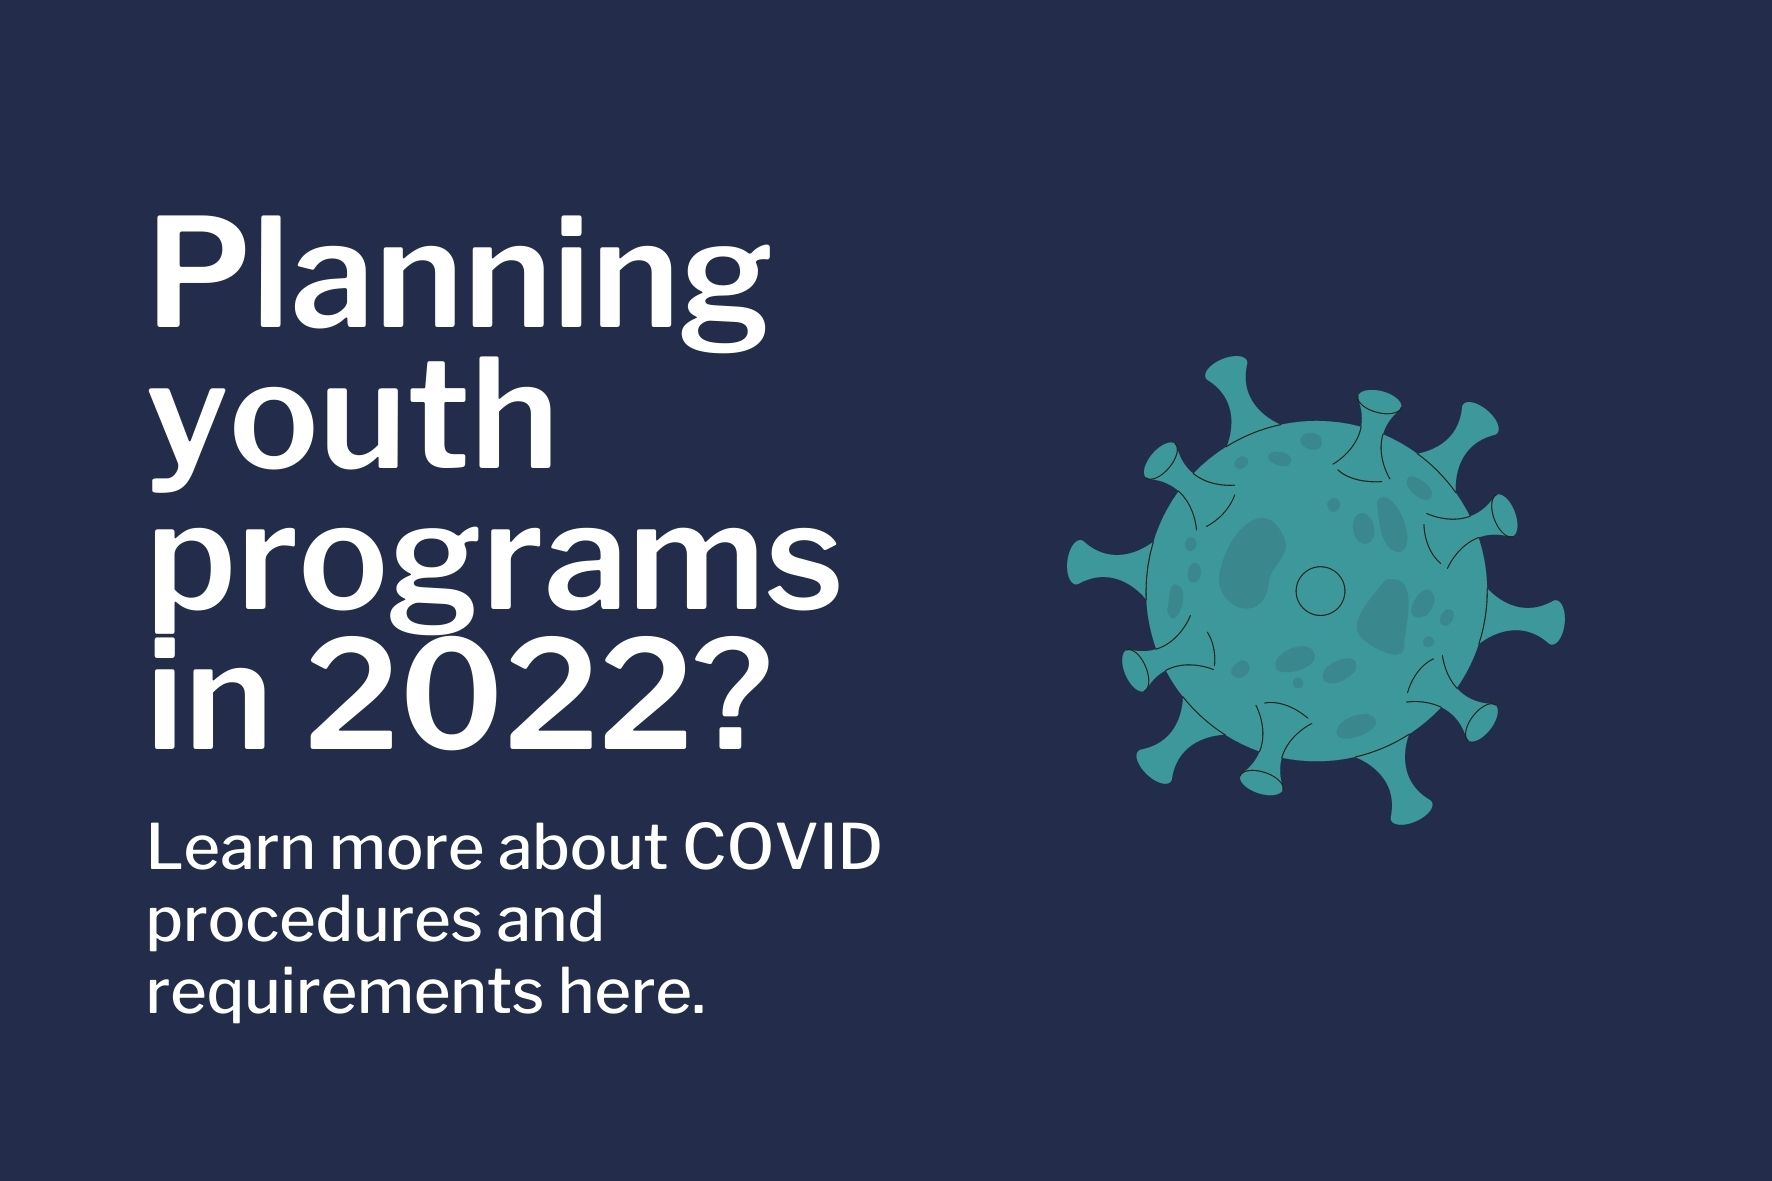 Blue background with white text stating "Planning youth programs in 2022? Learn more about COVID procedures and requirements here."